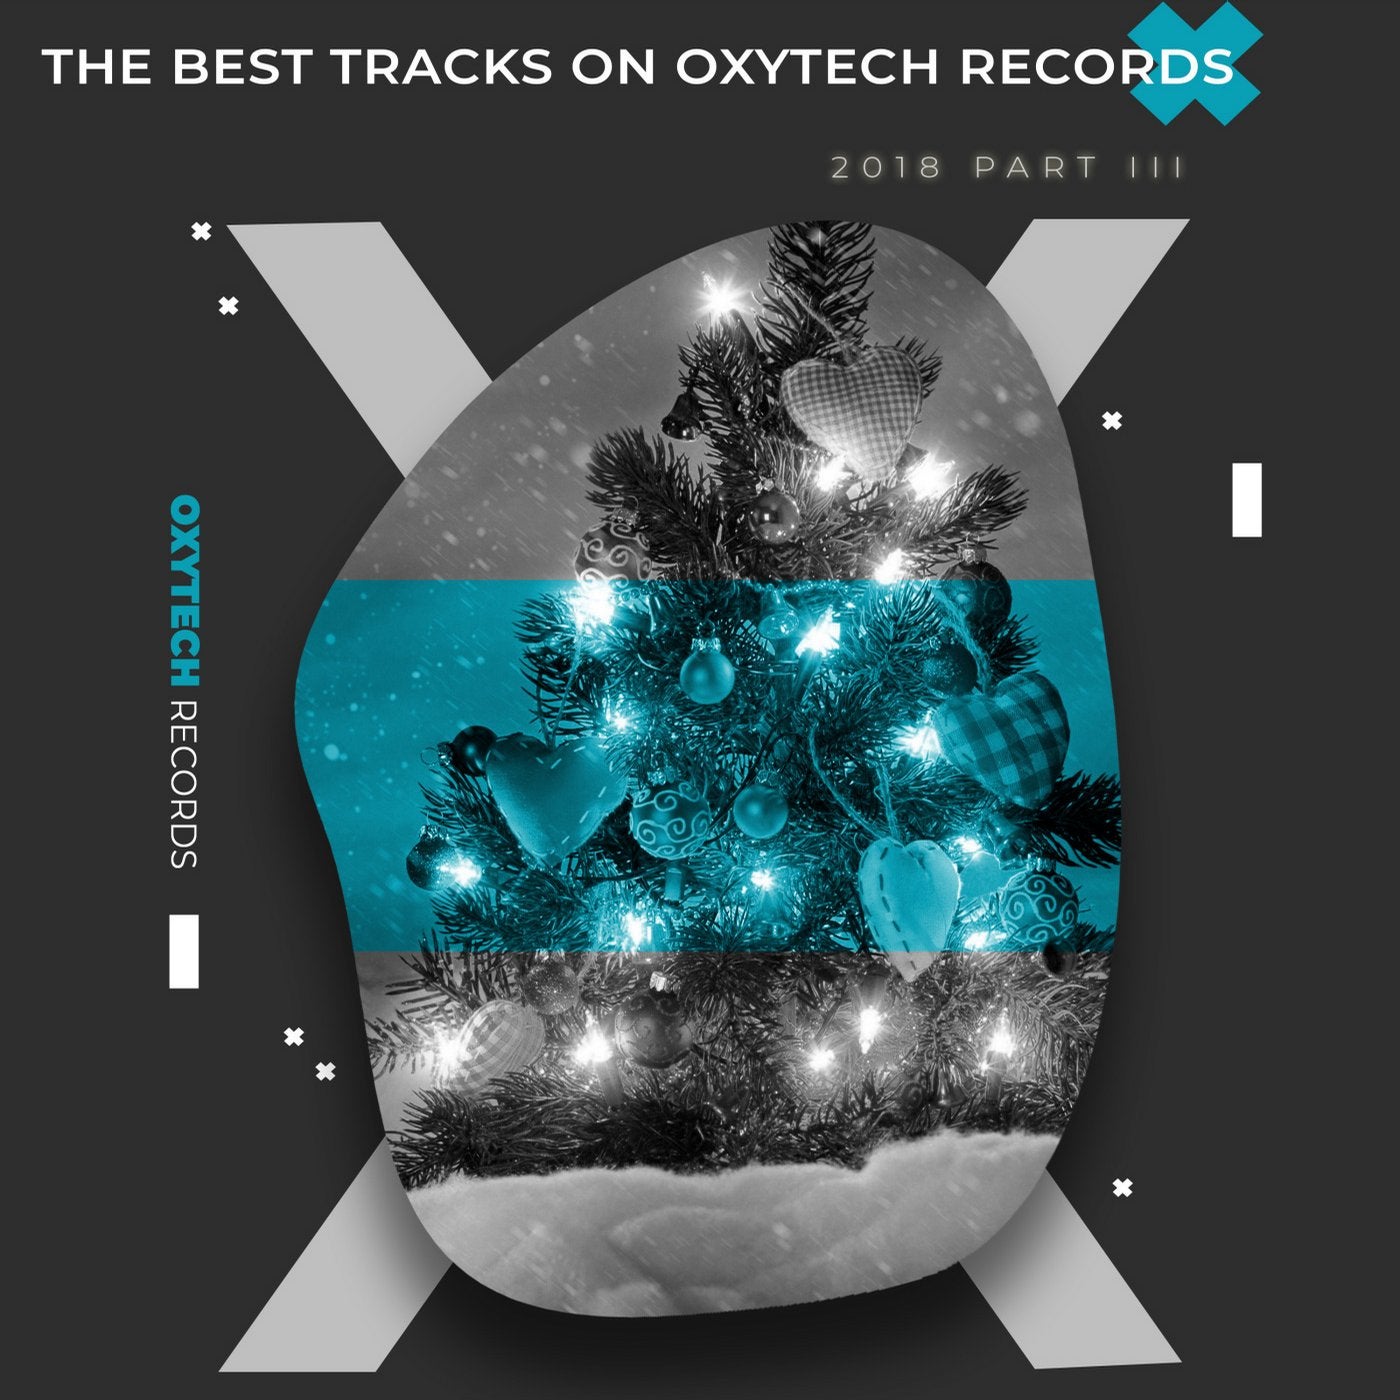 The Best Tracks on Oxytech Records. 2018. Part III